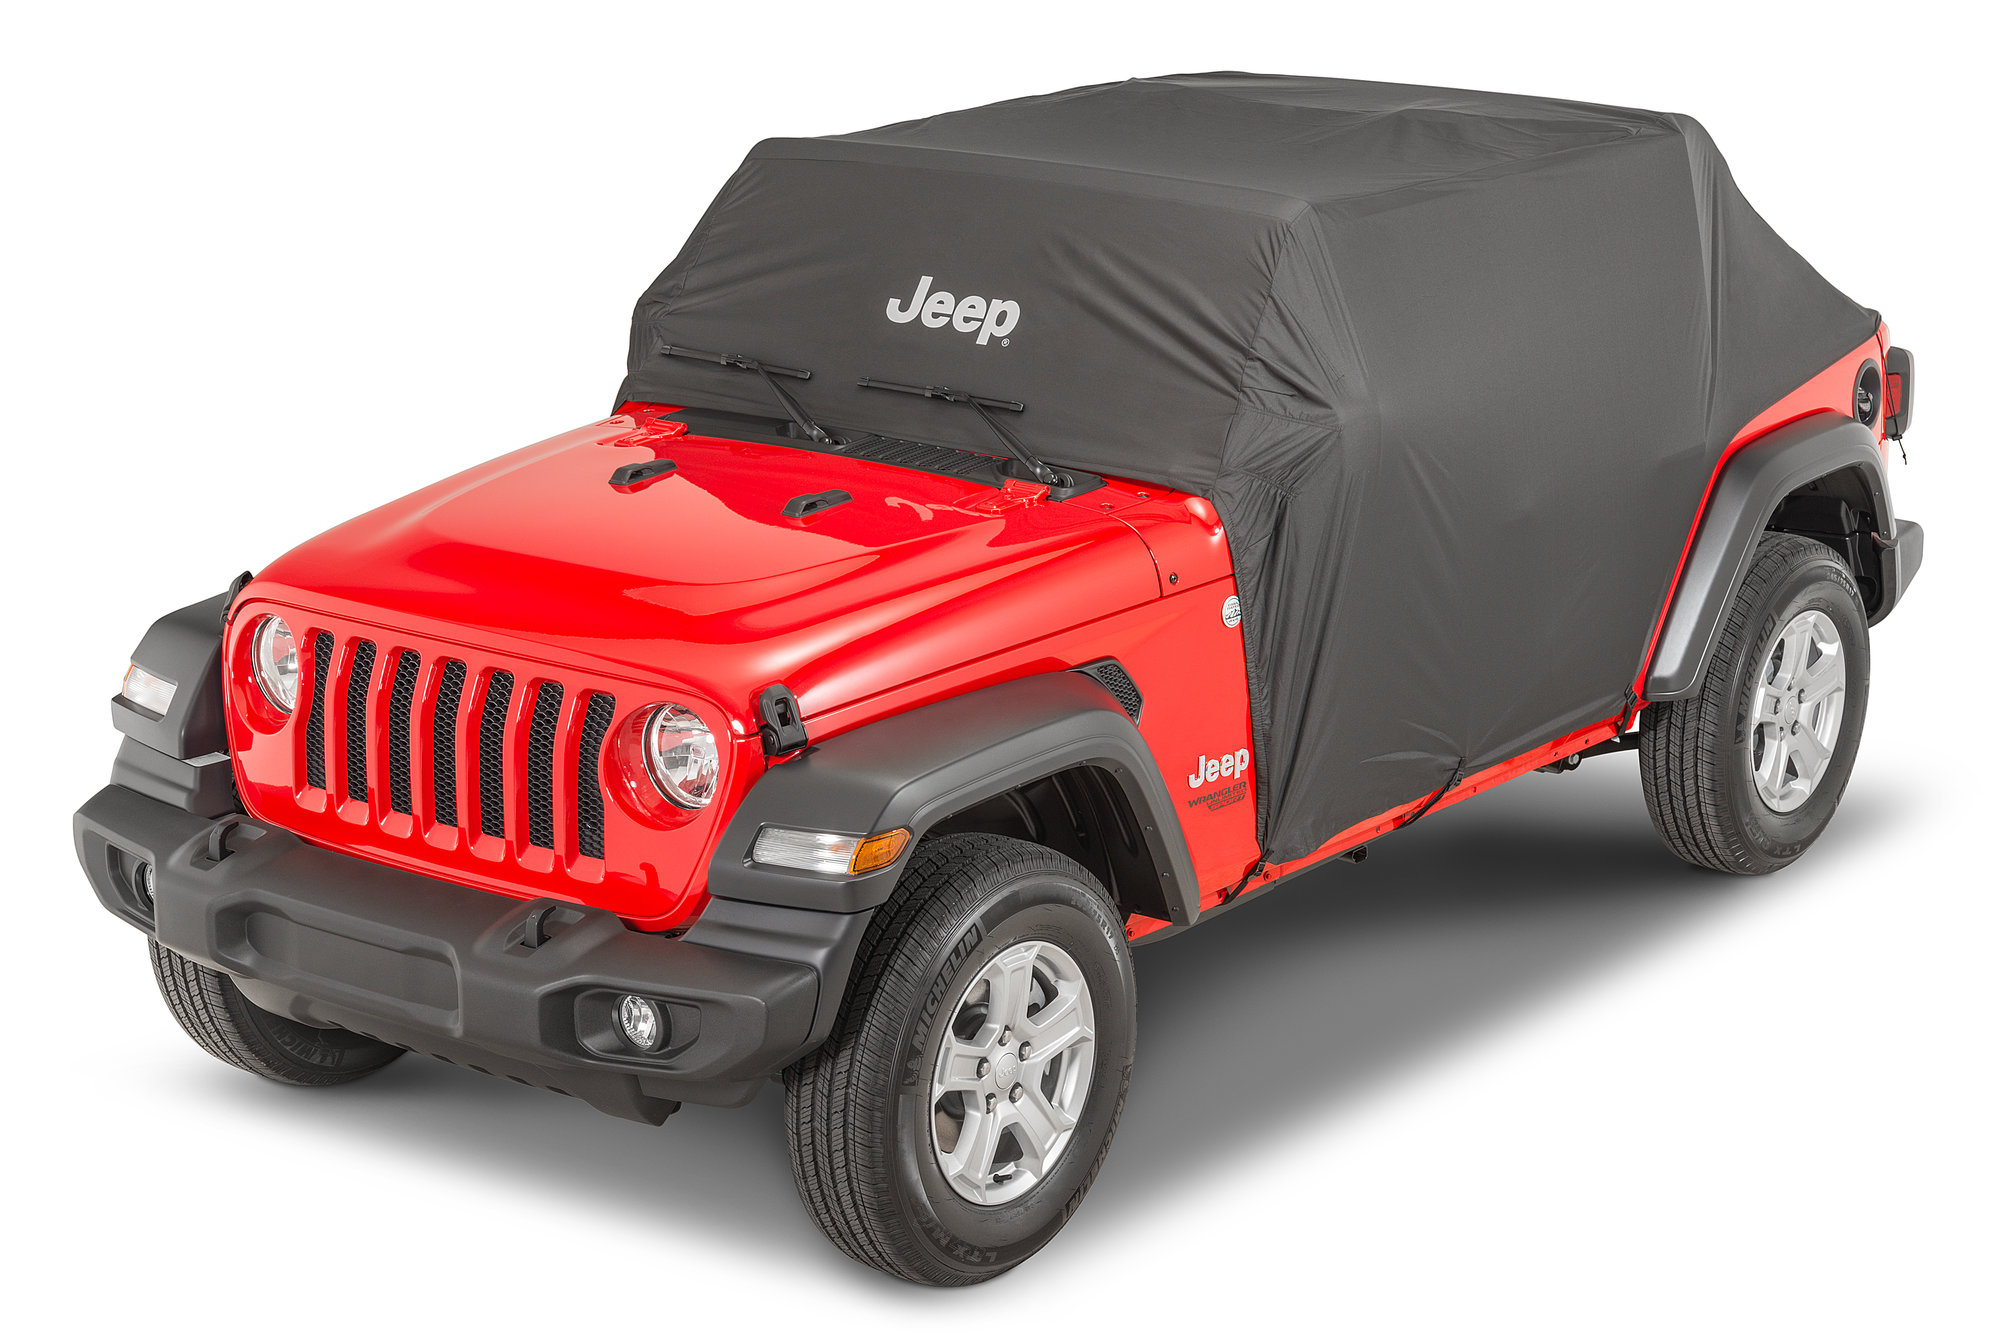 JEEP WRANGLER Black Water Resistent Nylon Cab Cover With Jeep Logo NEW OEM MOPAR